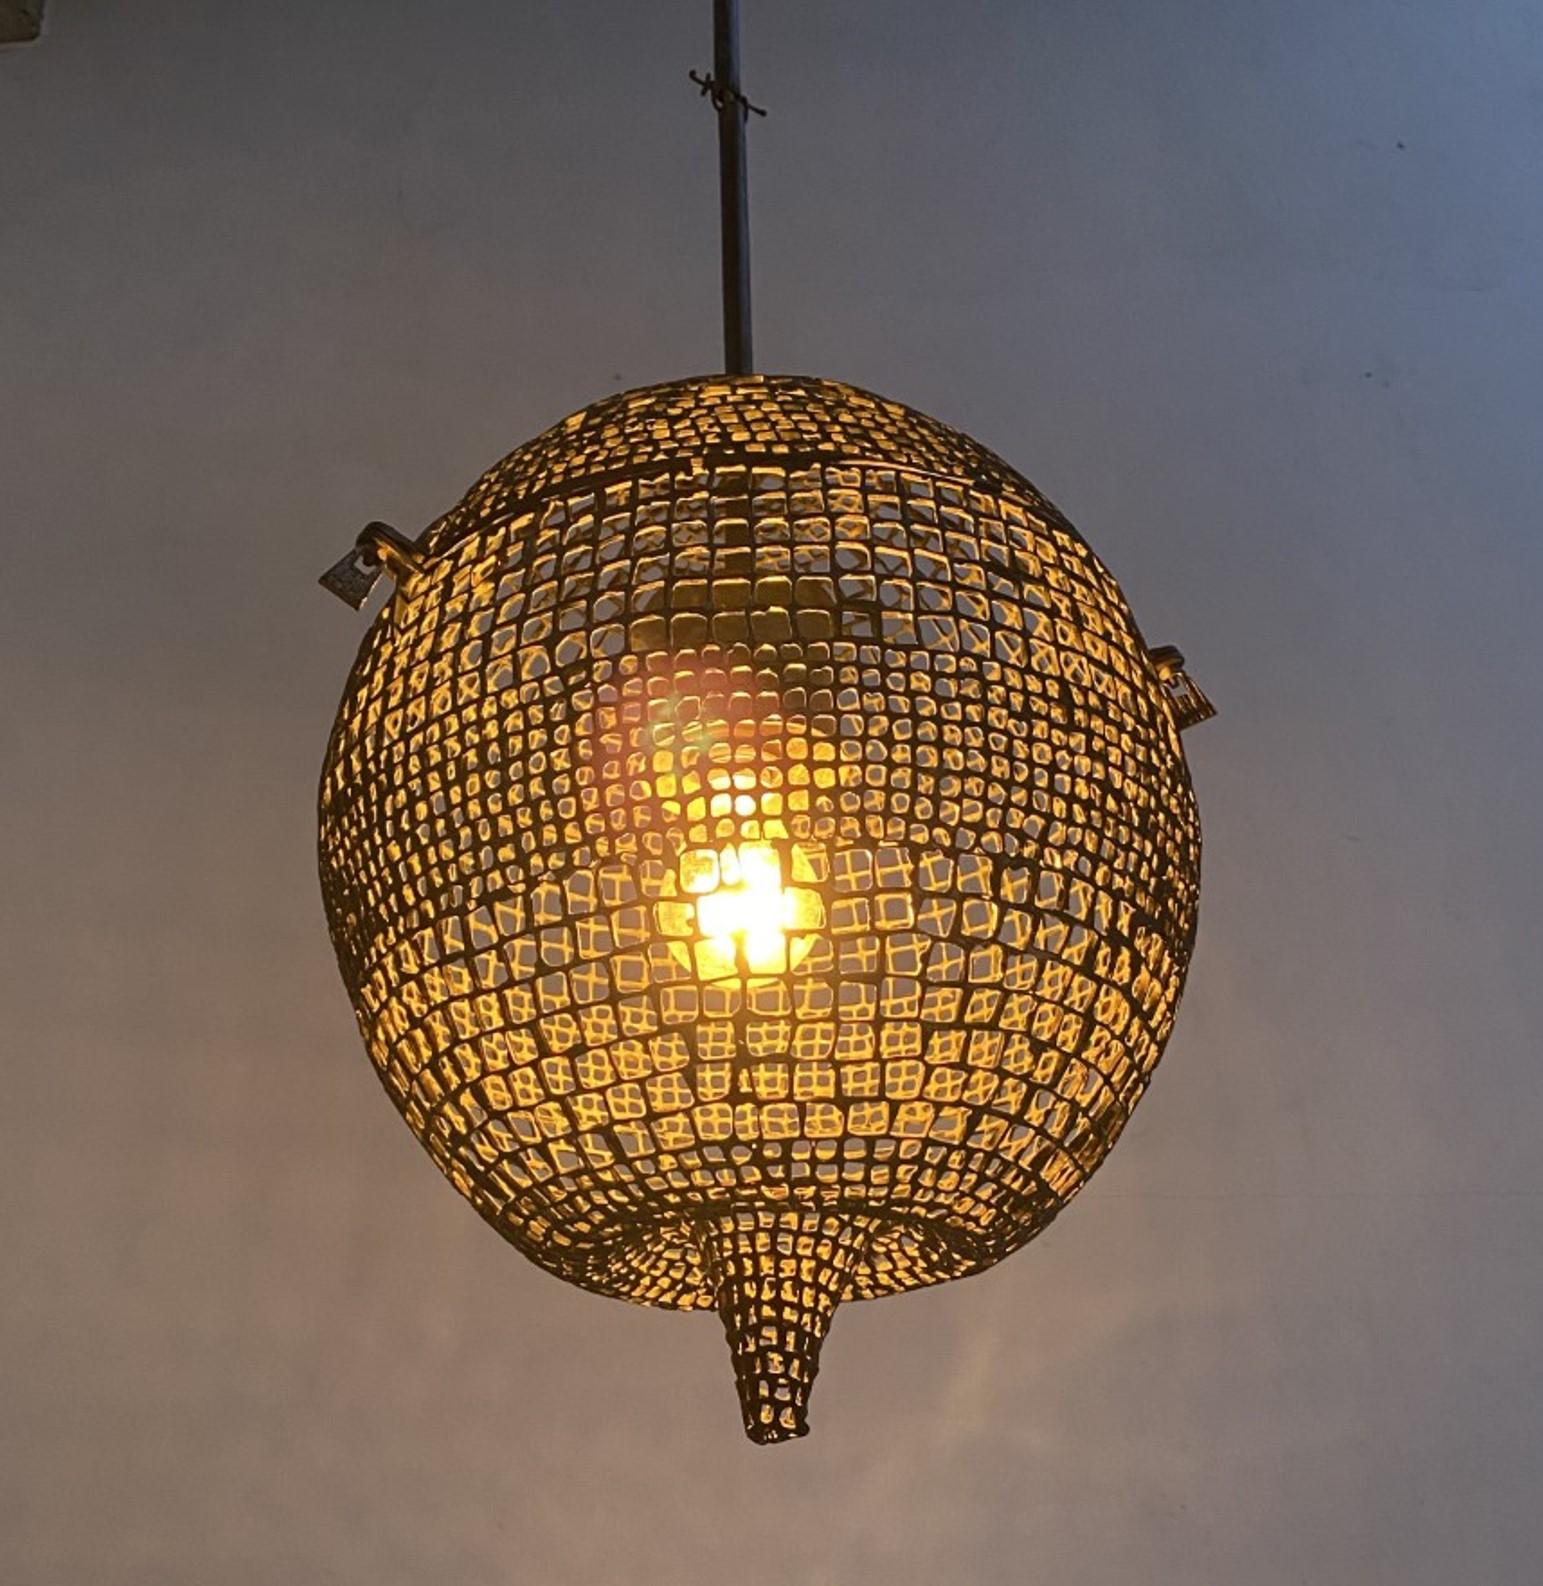 Amazing and super rare bronze filligree pendant lamp with a beautiful organic sculptural form signed by Italian sculptor Lorenzo Burchiellaro (1933-2017), judging by the intricacy of the artisan work involved this is clearly a very early